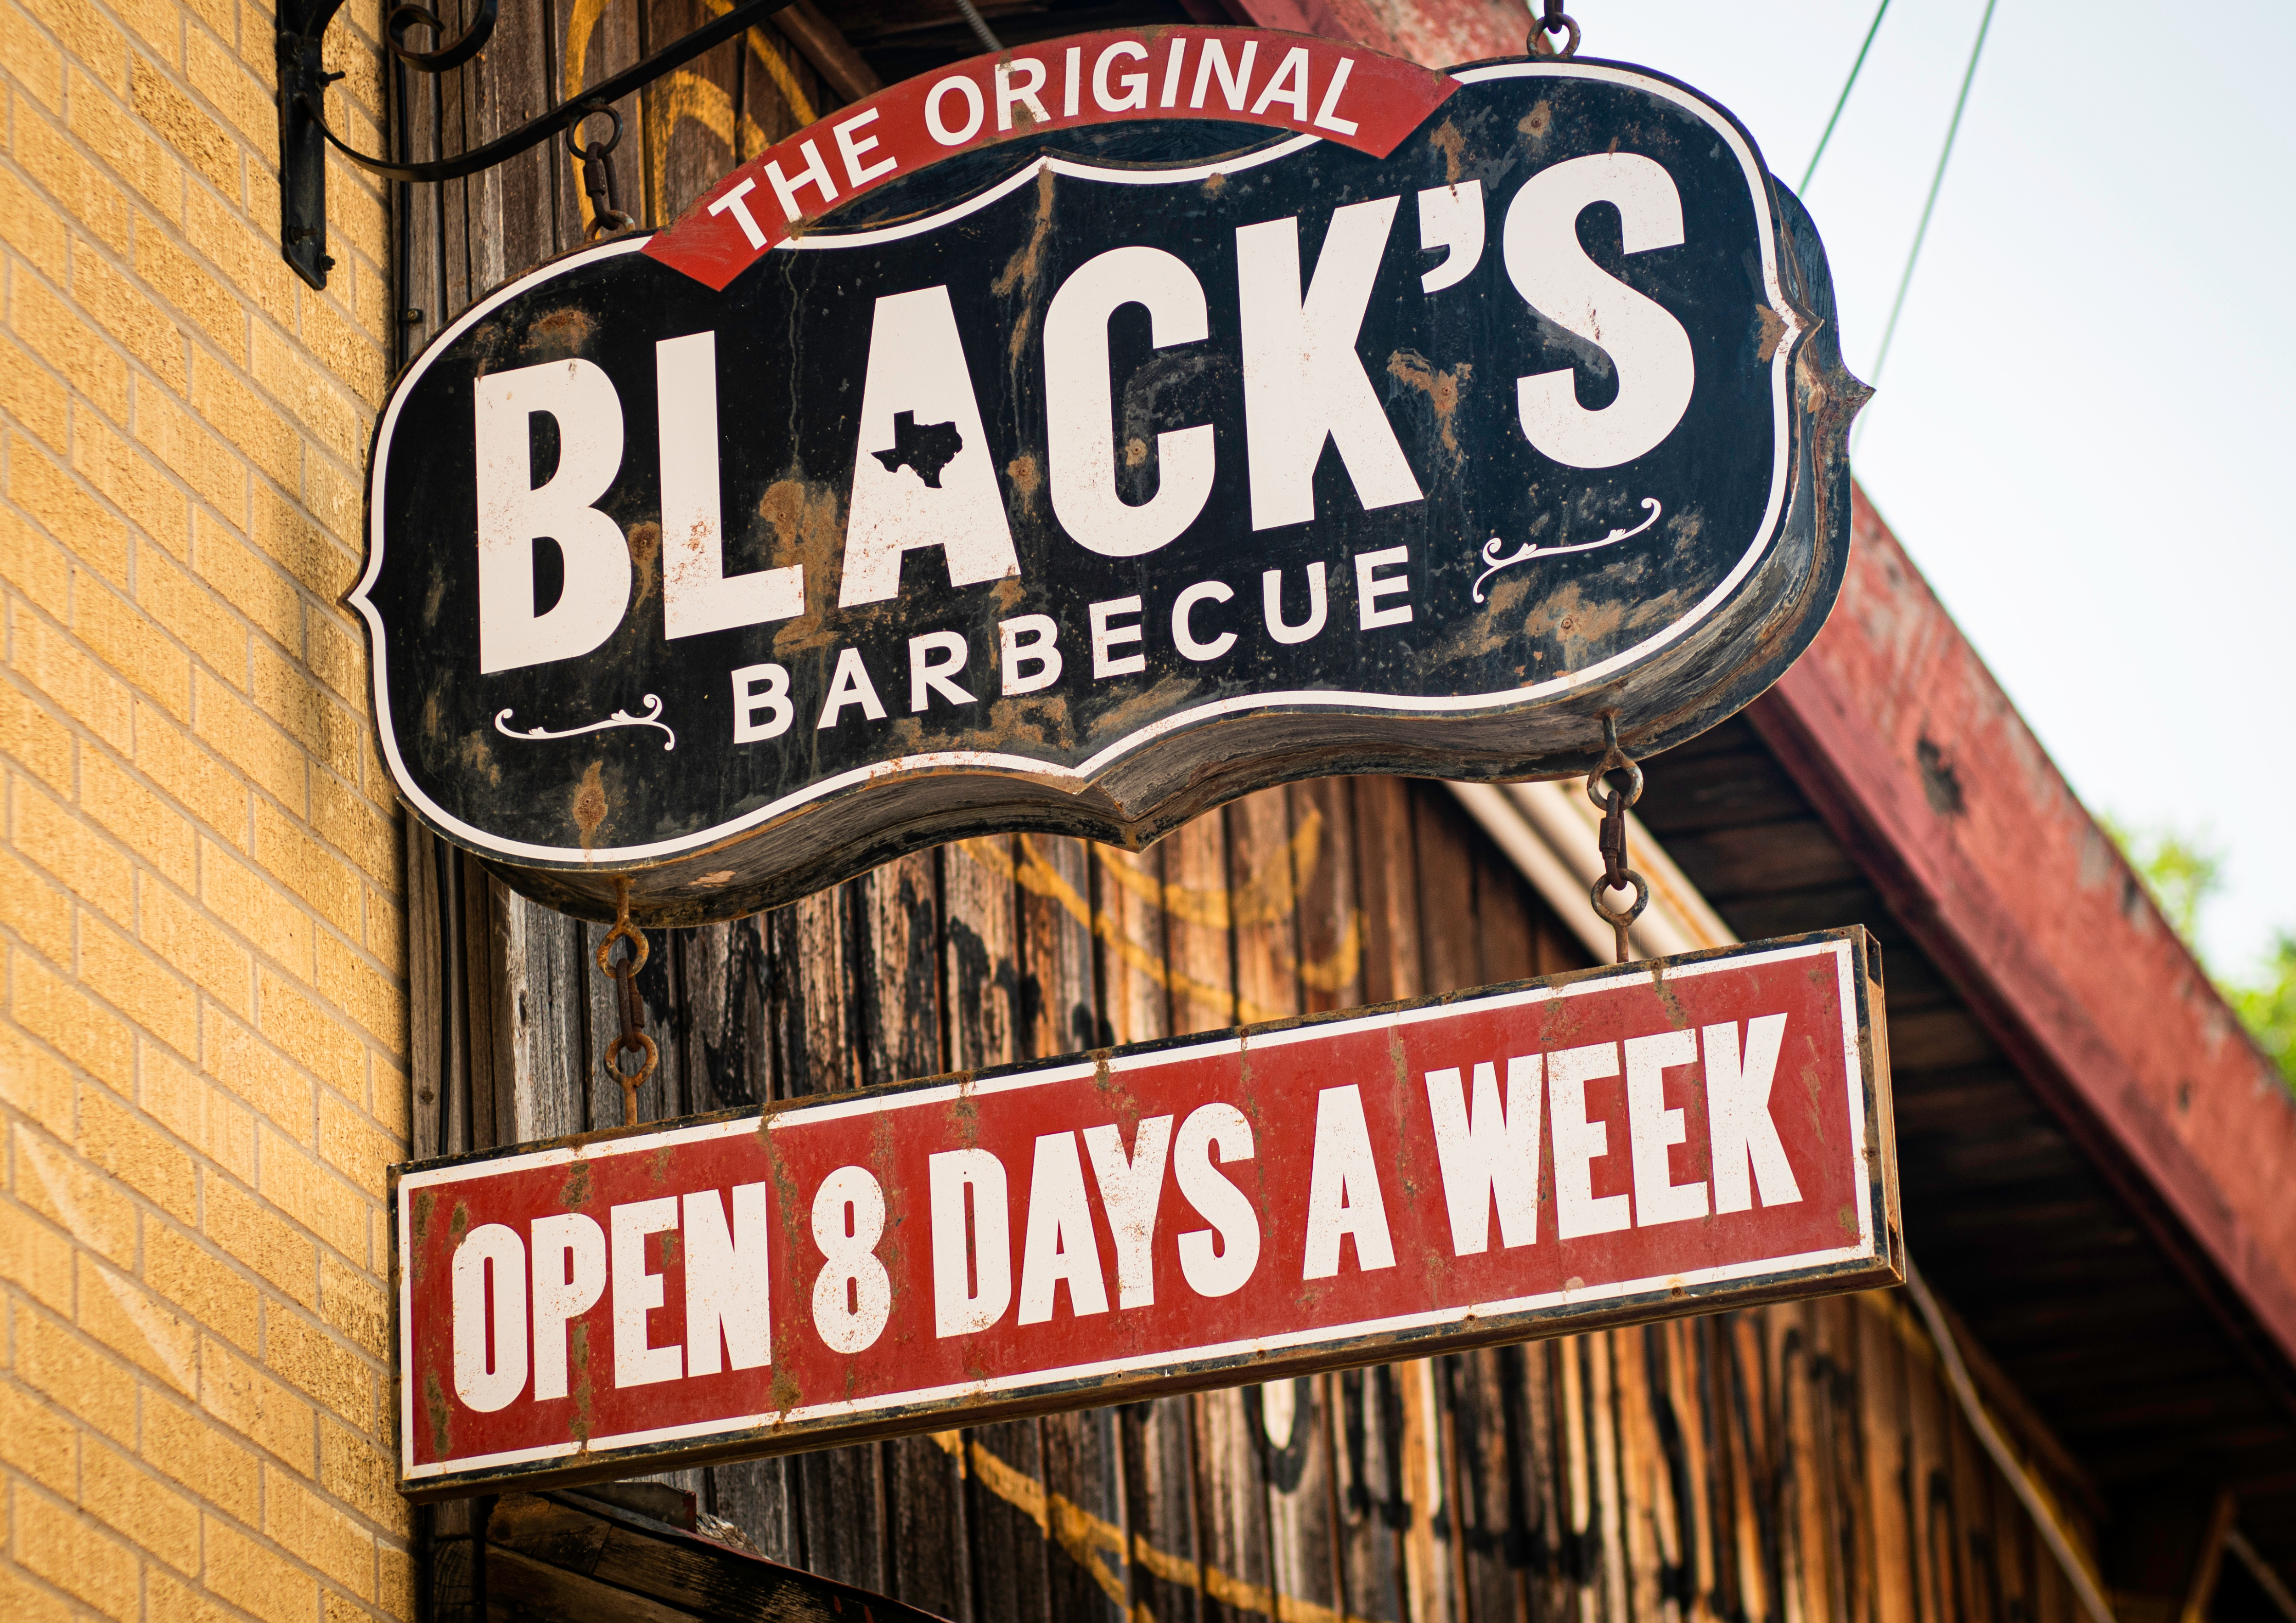 Black's Barbecue sign in Austin, Texas. The sign also states that the restaurant is open 8 days a week.